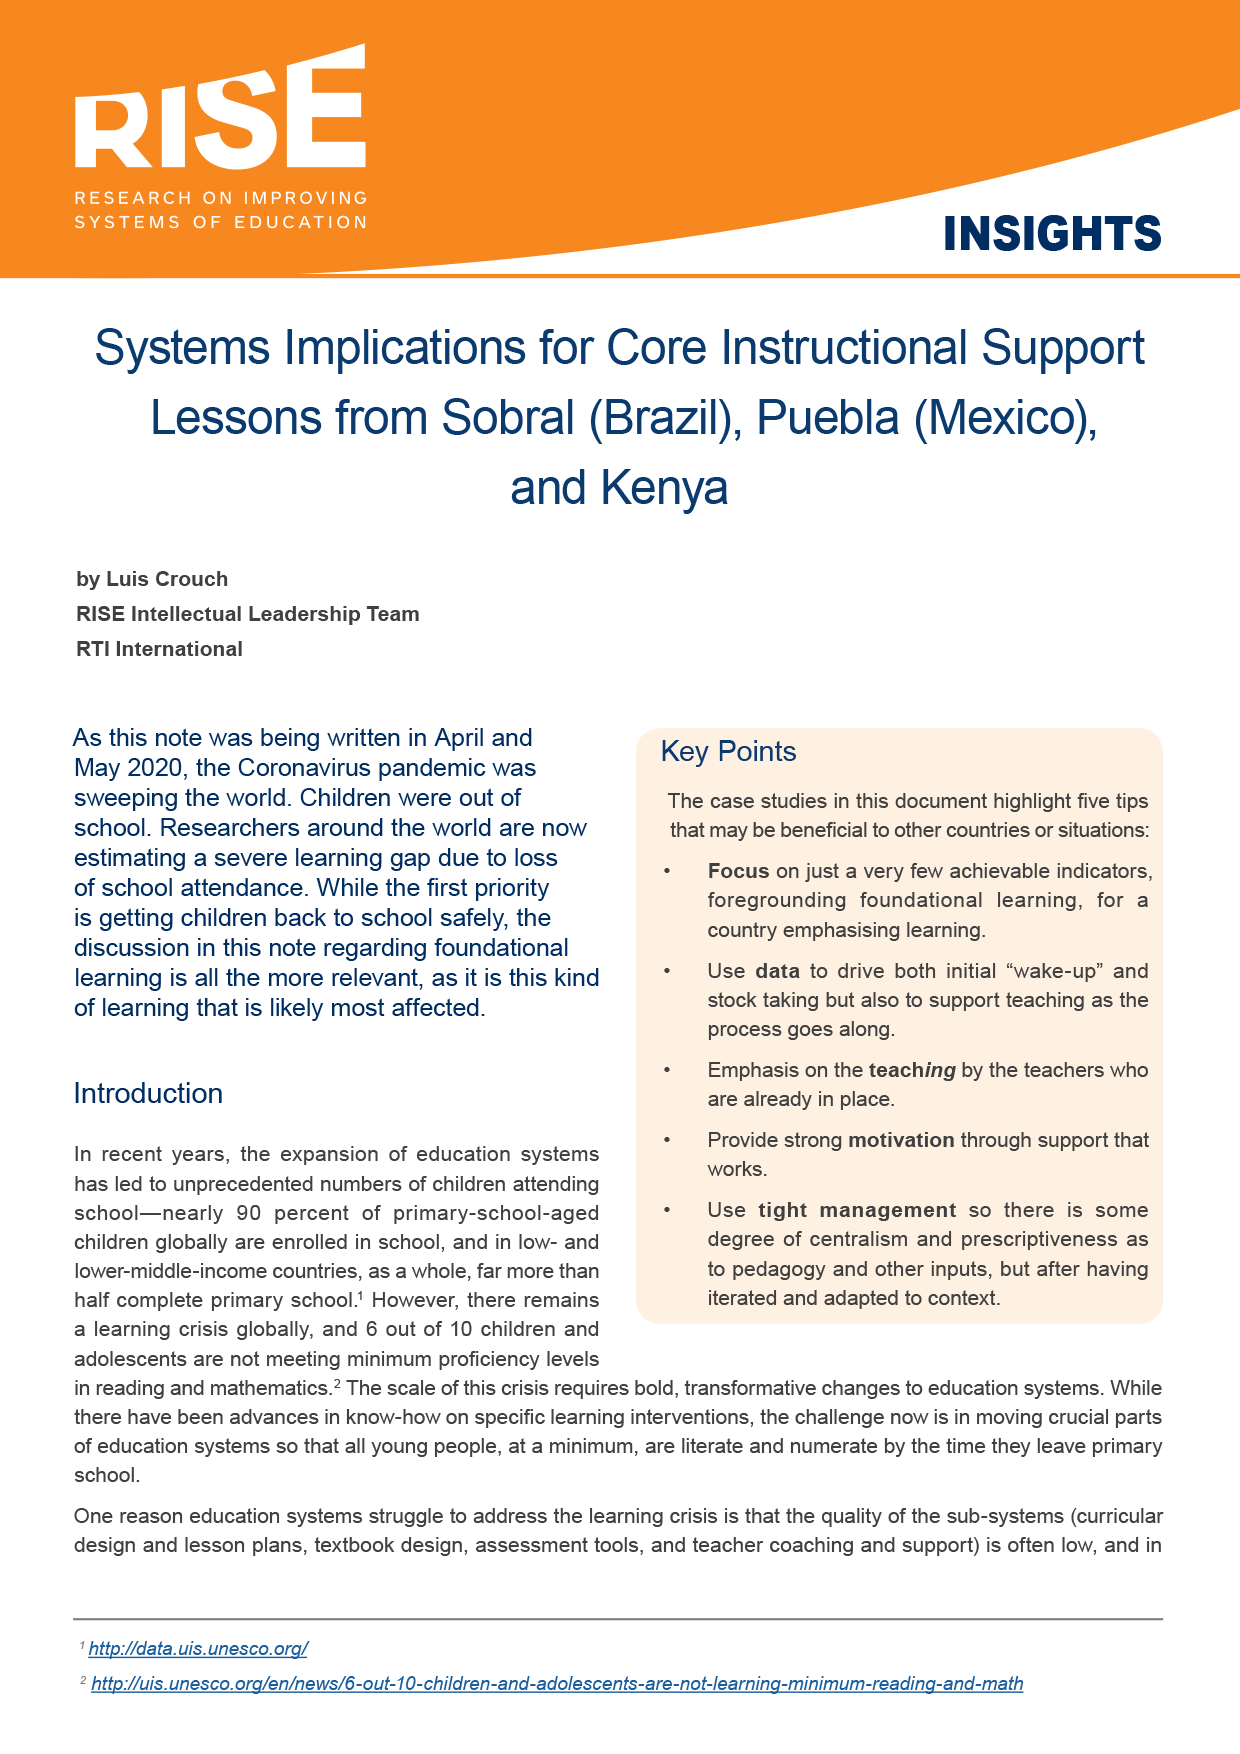 Systems Implications for Core Instructional Support, Luis Crouch 